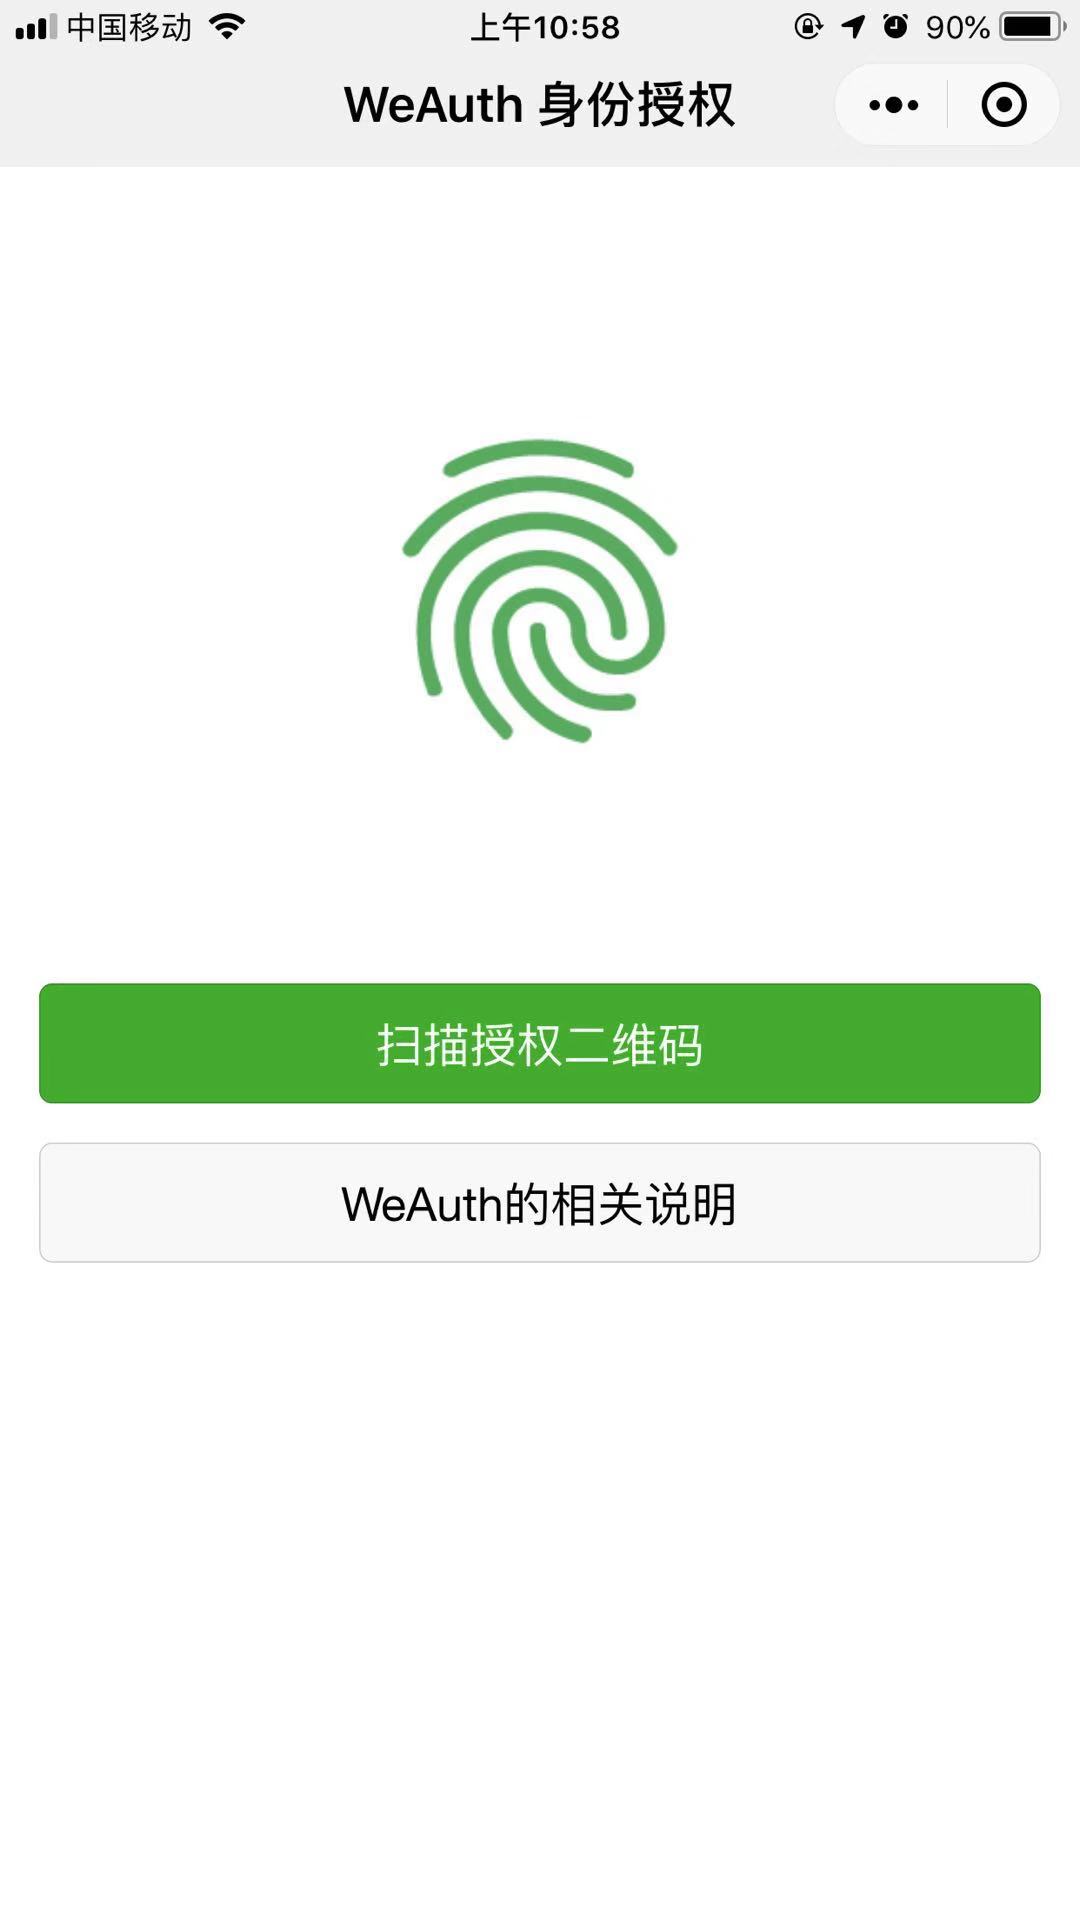 WeAuth